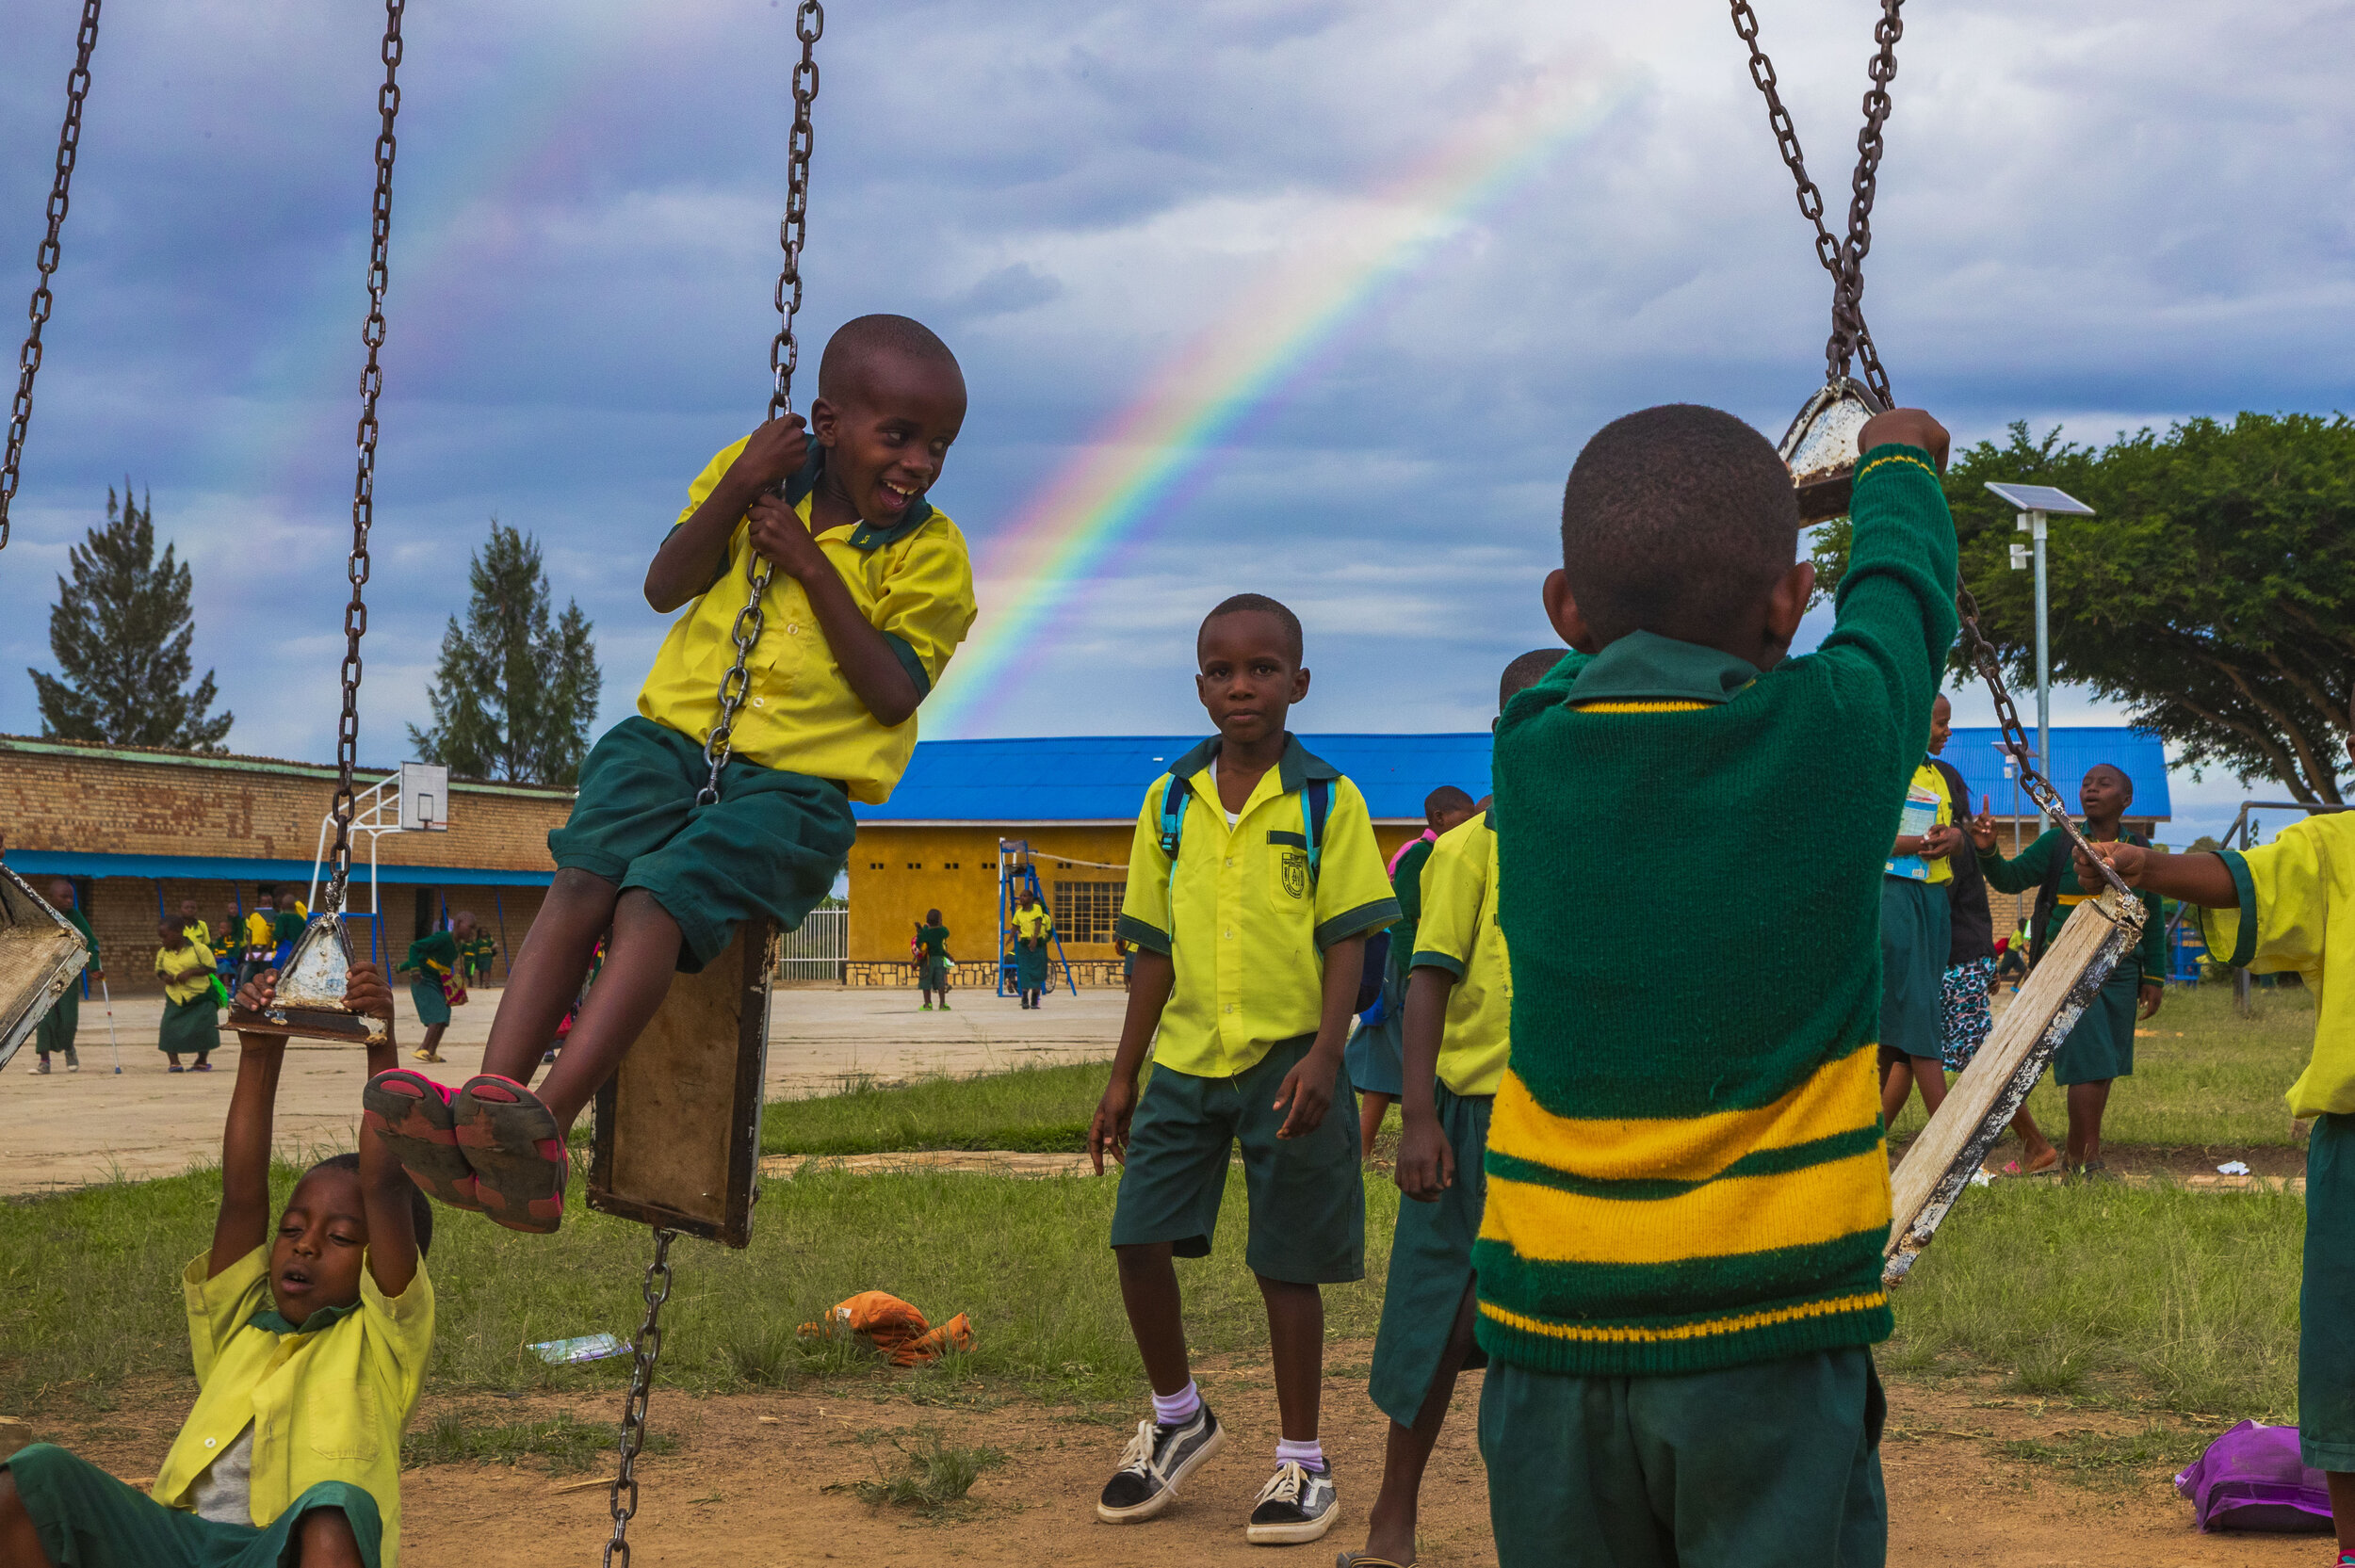  School children play on a broken swing set after a storm at HVP Gatagara-Nyanza on Monday May 20, 2019 in Southern Province, Rwanda. HVP Gatagara-Nyanza is one of the few government funded schools in Rwanda that integrates those with physical/mental